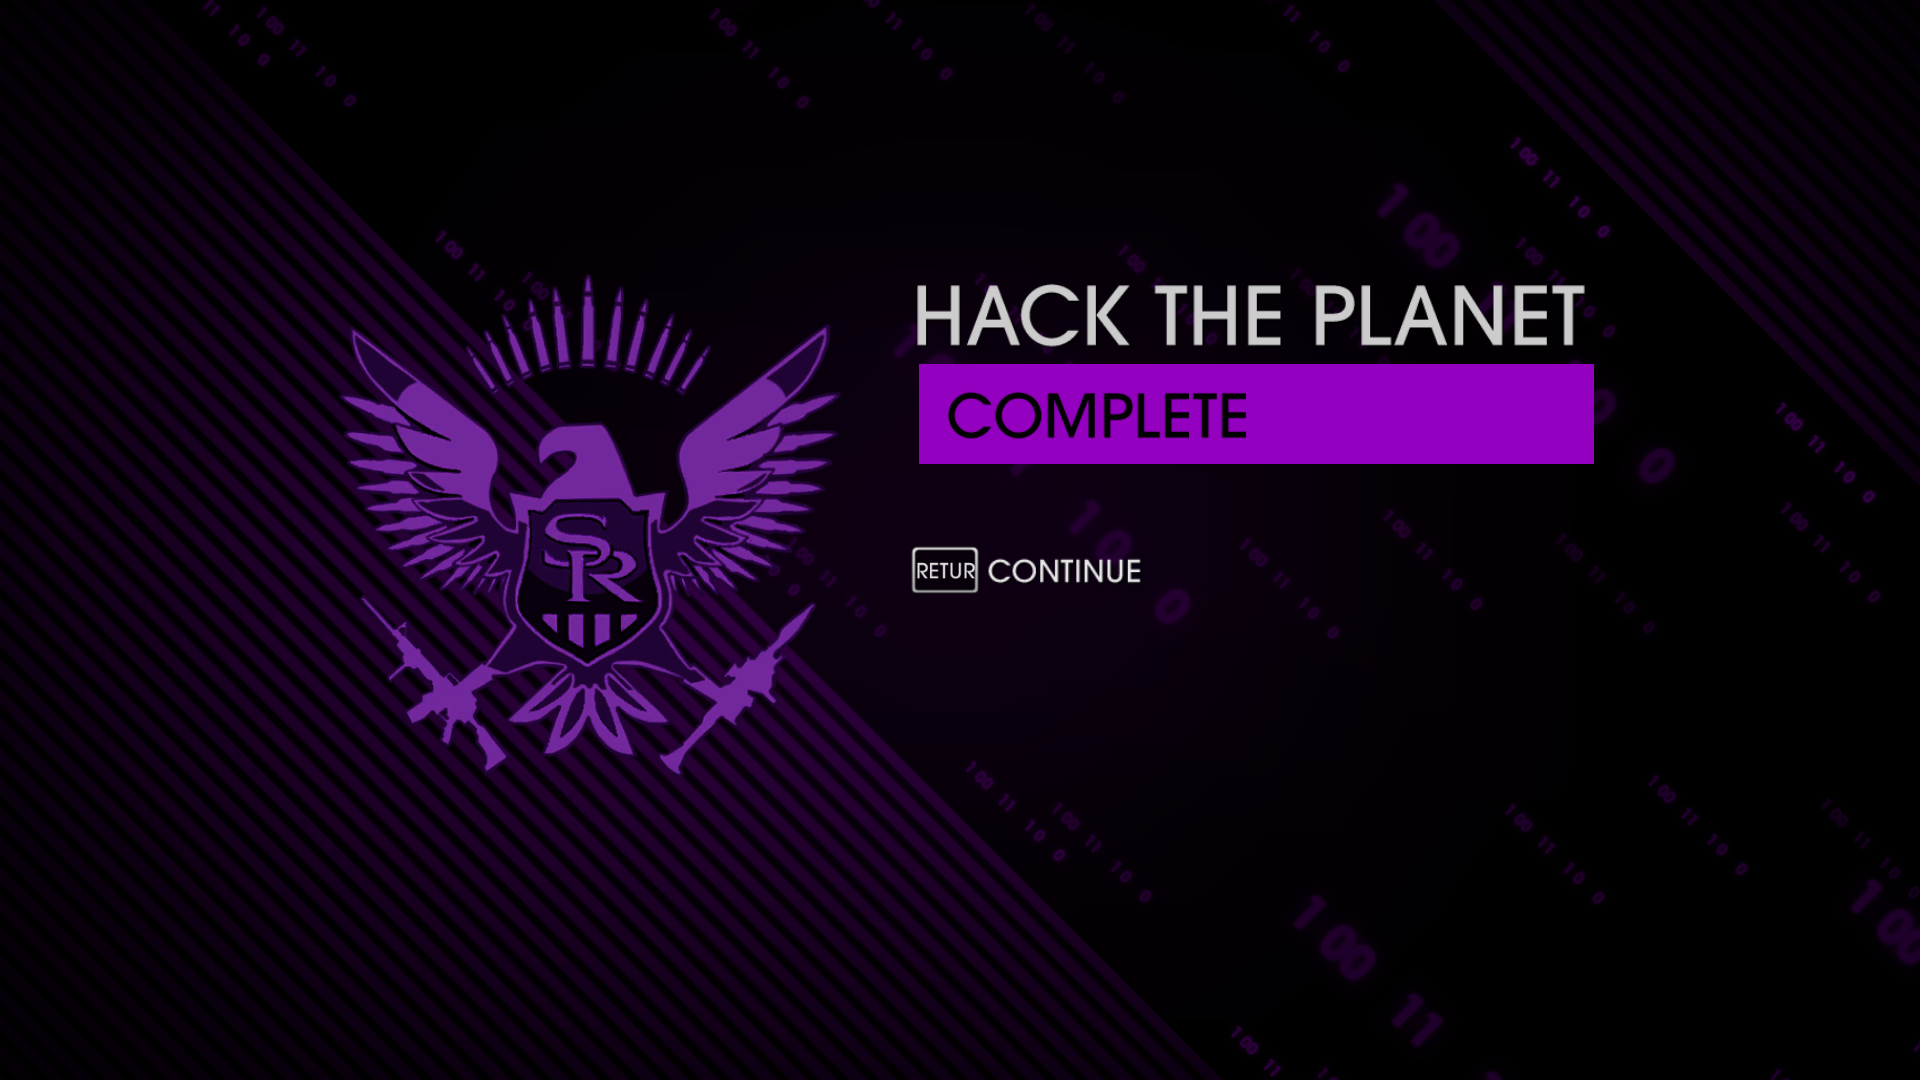 hack the planet hackers